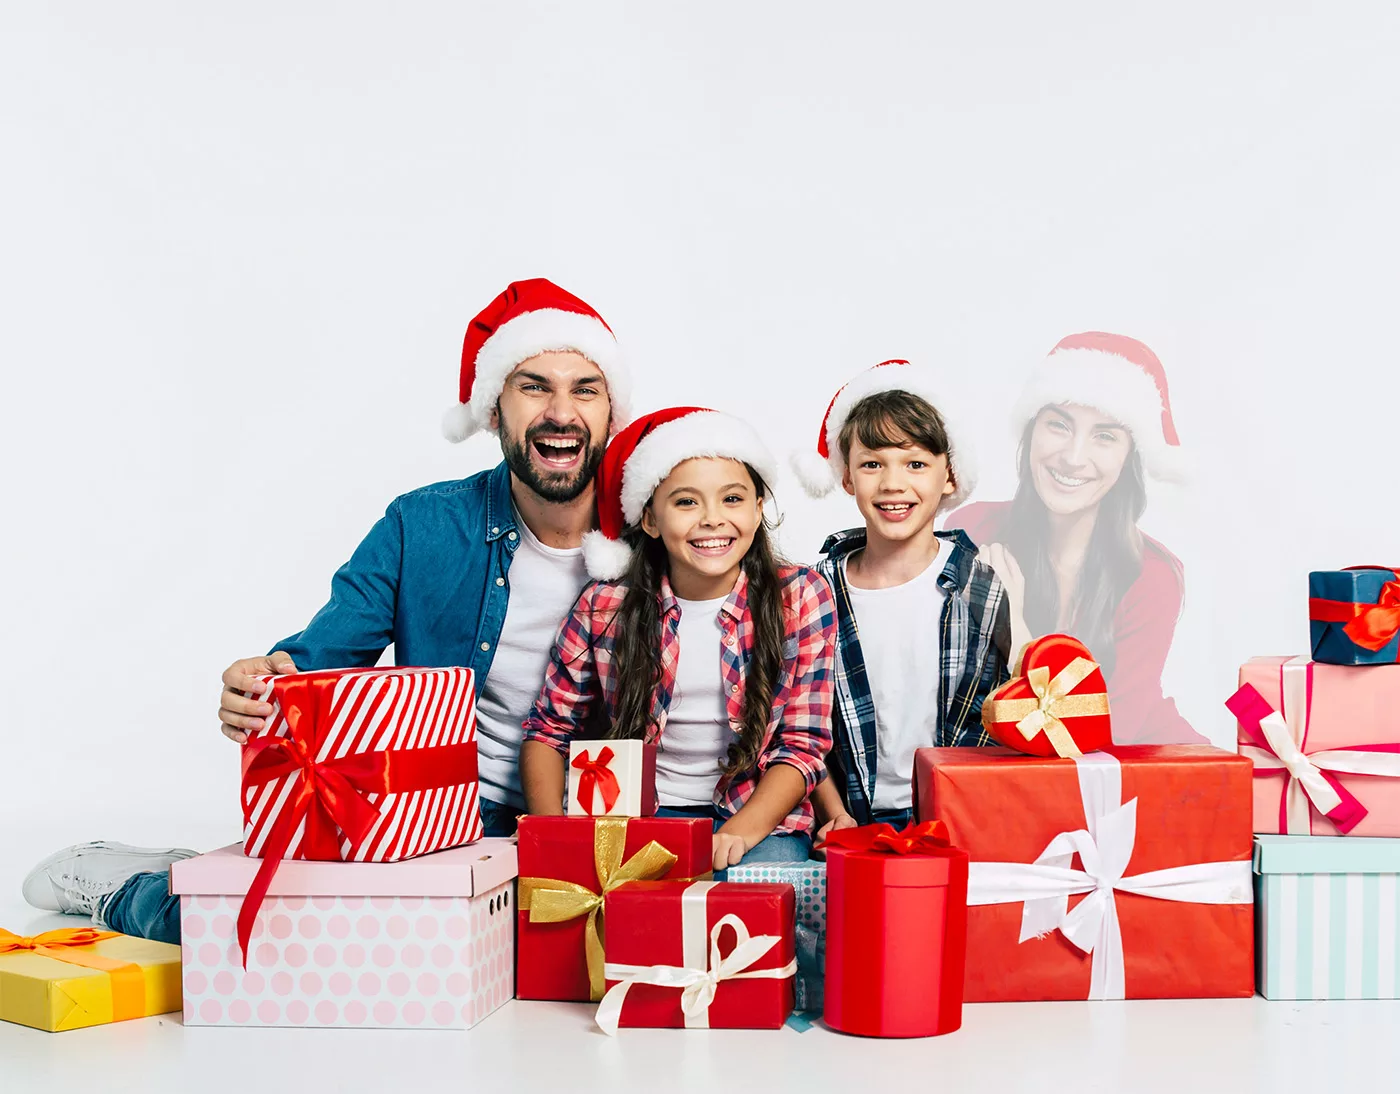 Sharing Children at the Holidays, by Co-parenting Expert Tammy Daughtry